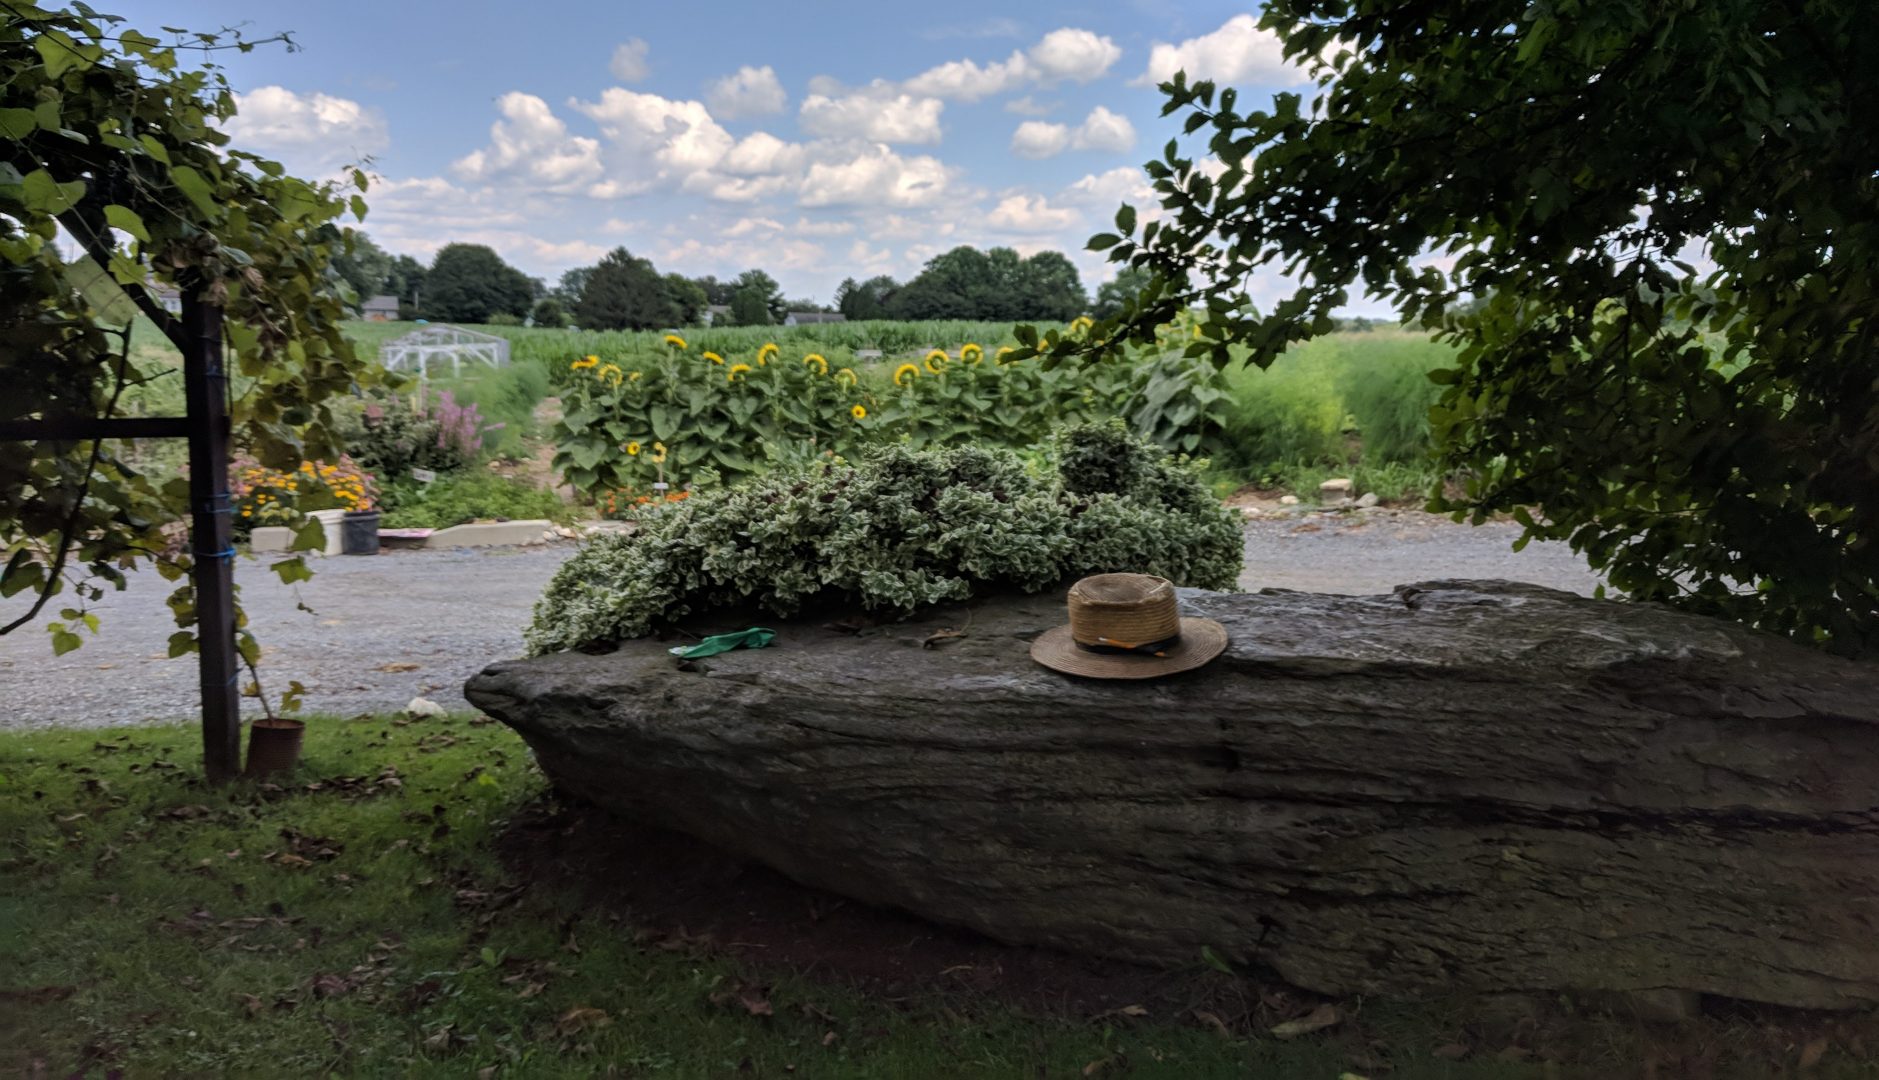 An Amish man’s hat rests on a rock outside a farmhouse in Leacock Township, Lancaster County, on July 24, 2019.